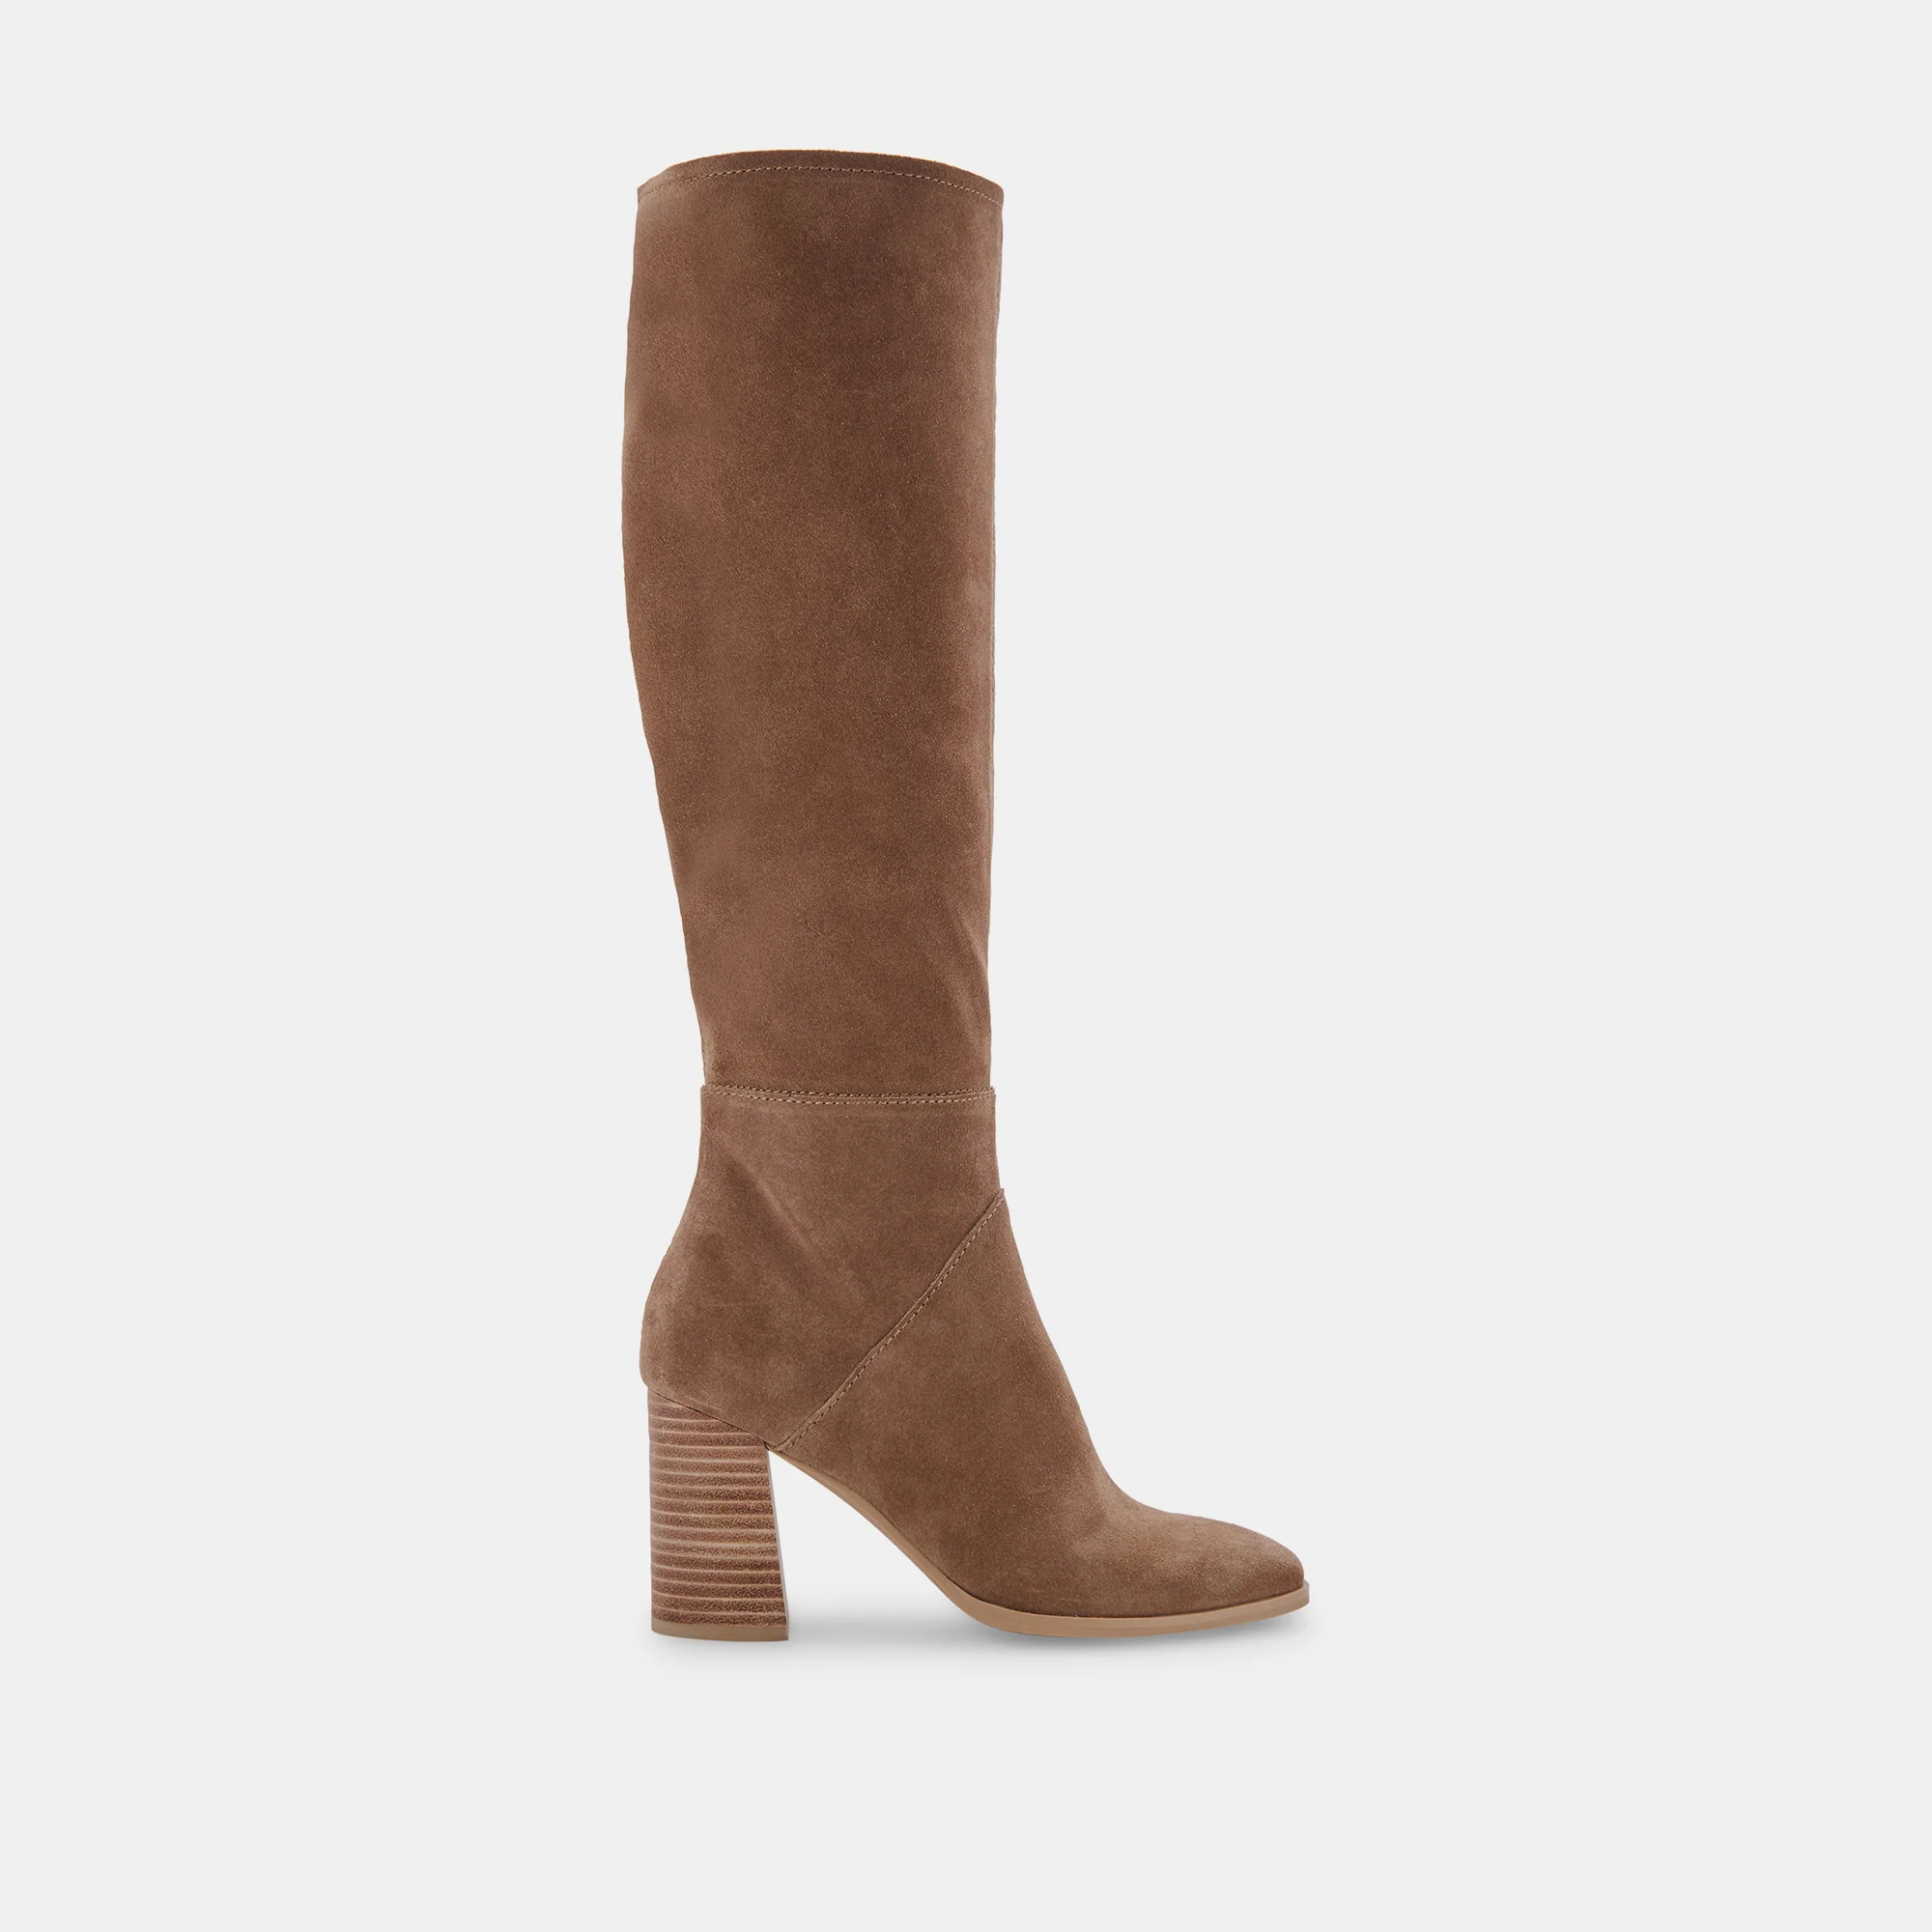 Dolce Vita Fynn Tall Boot in Truffle Suede